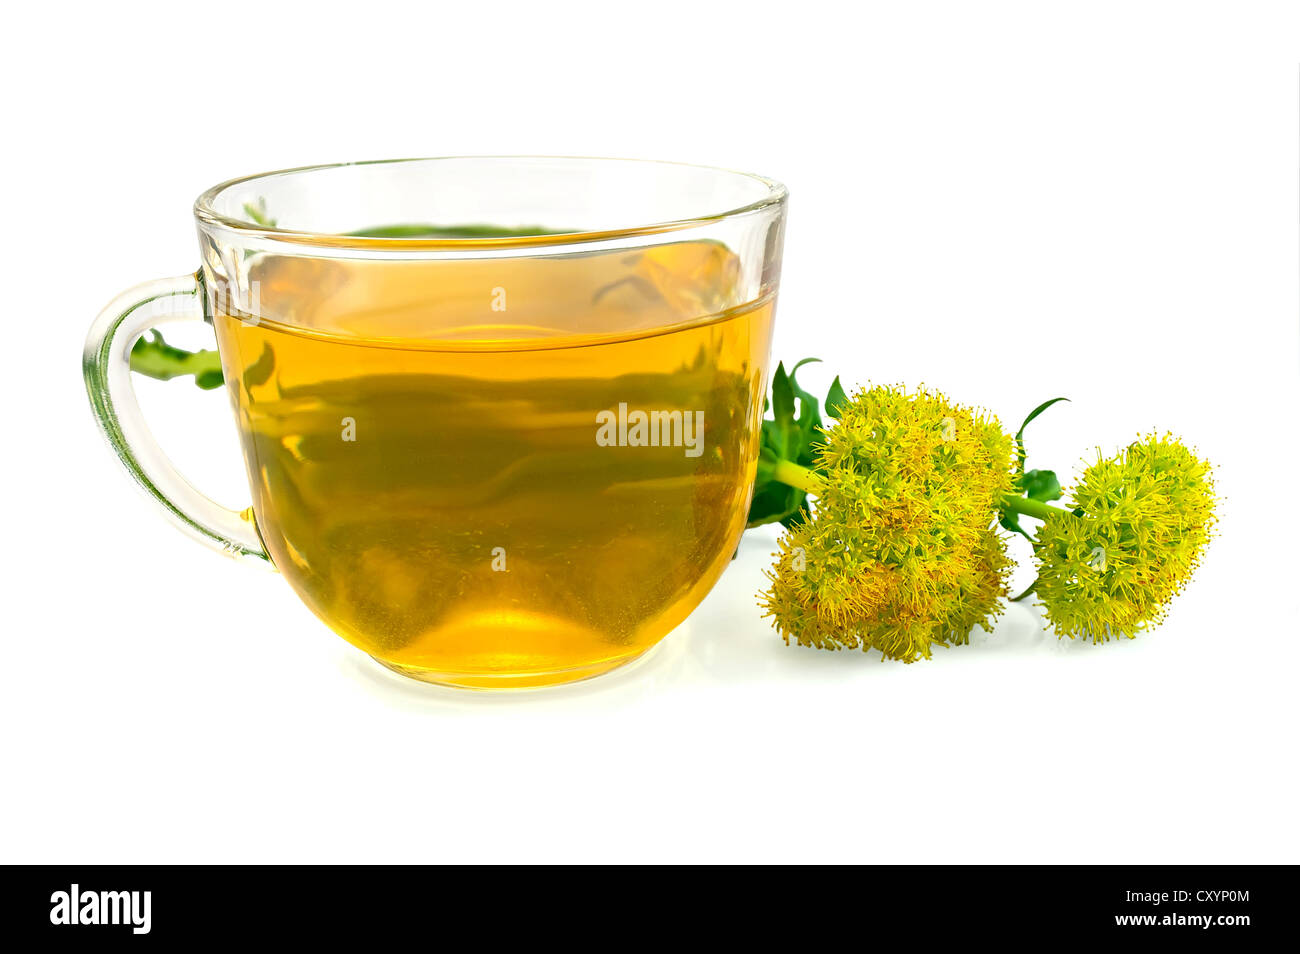 Healing herbal tea in a glass bowl with flowers Rhodiola rosea is isolated on a white background Stock Photo